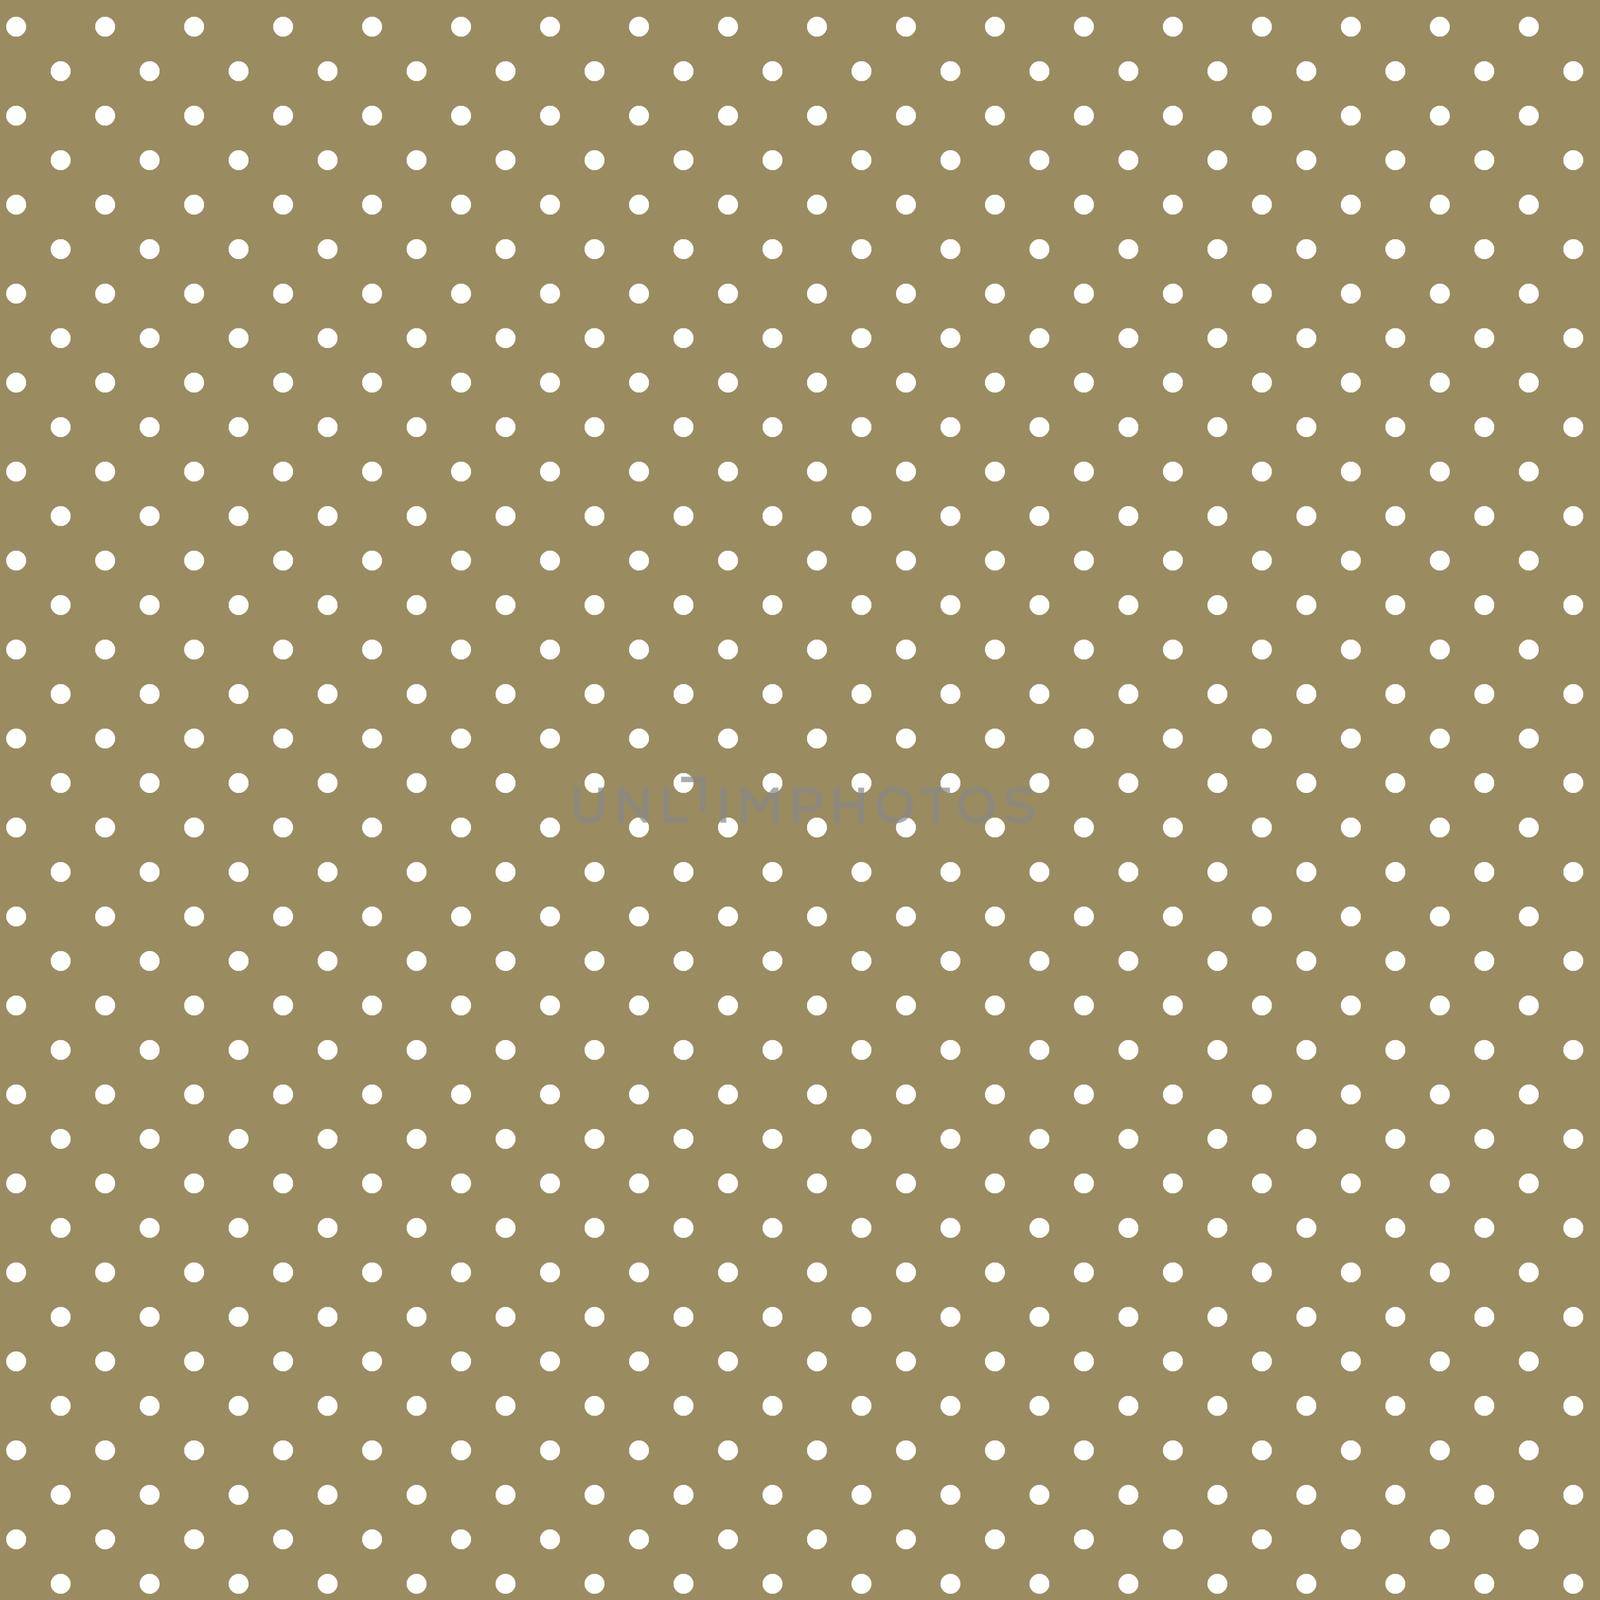 Background image small circles on a brown background by Mastak80